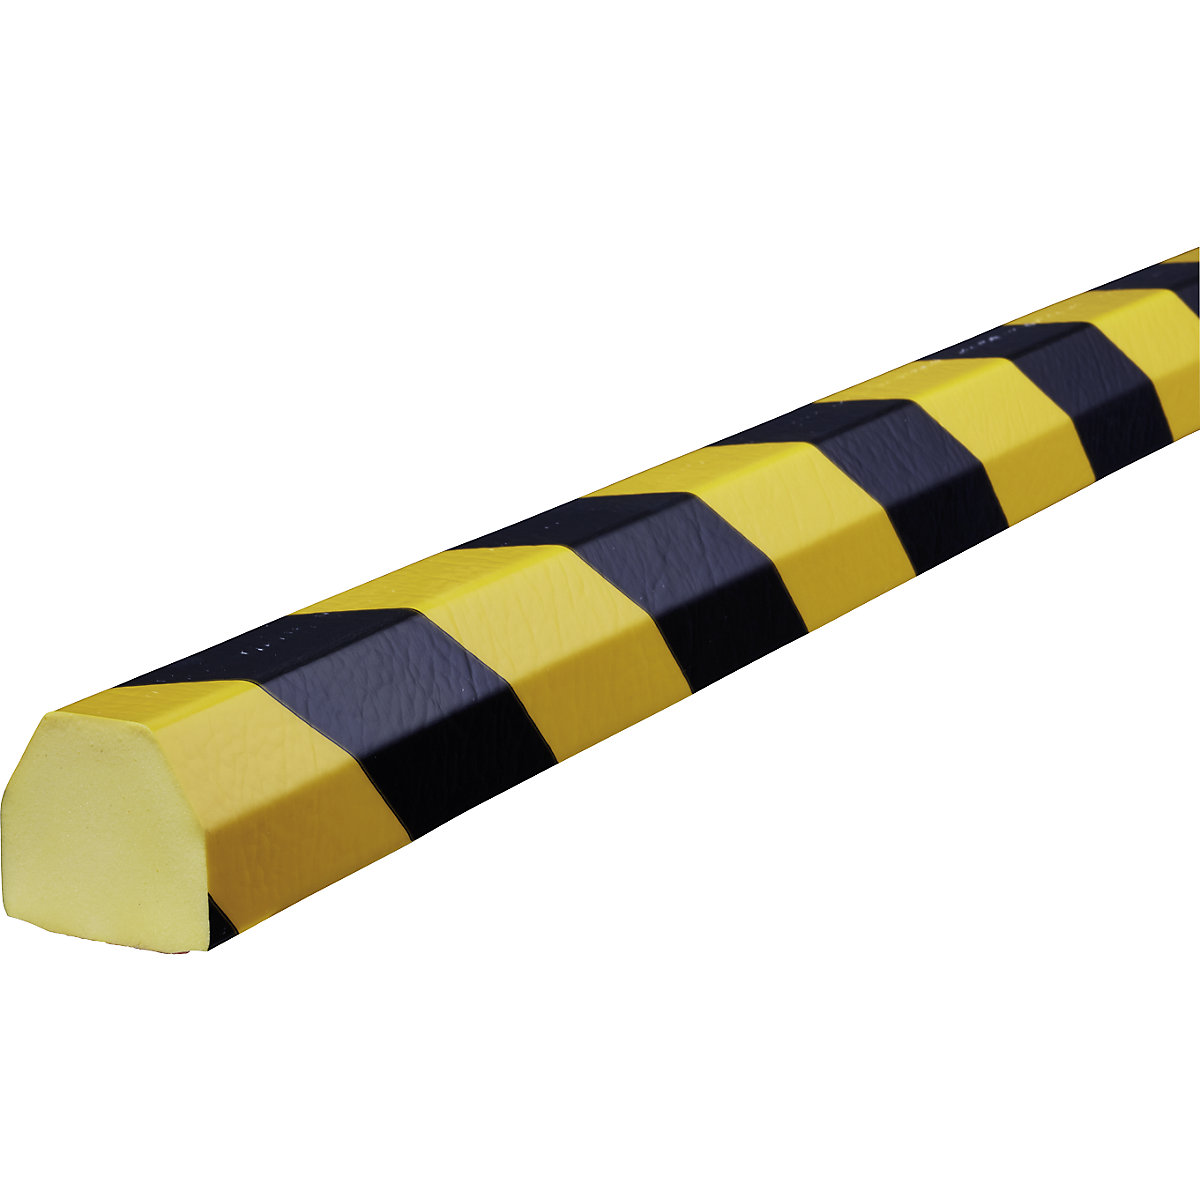 Knuffi® surface protection – SHG, type CC, 1 x 5 m roll, black / yellow-22